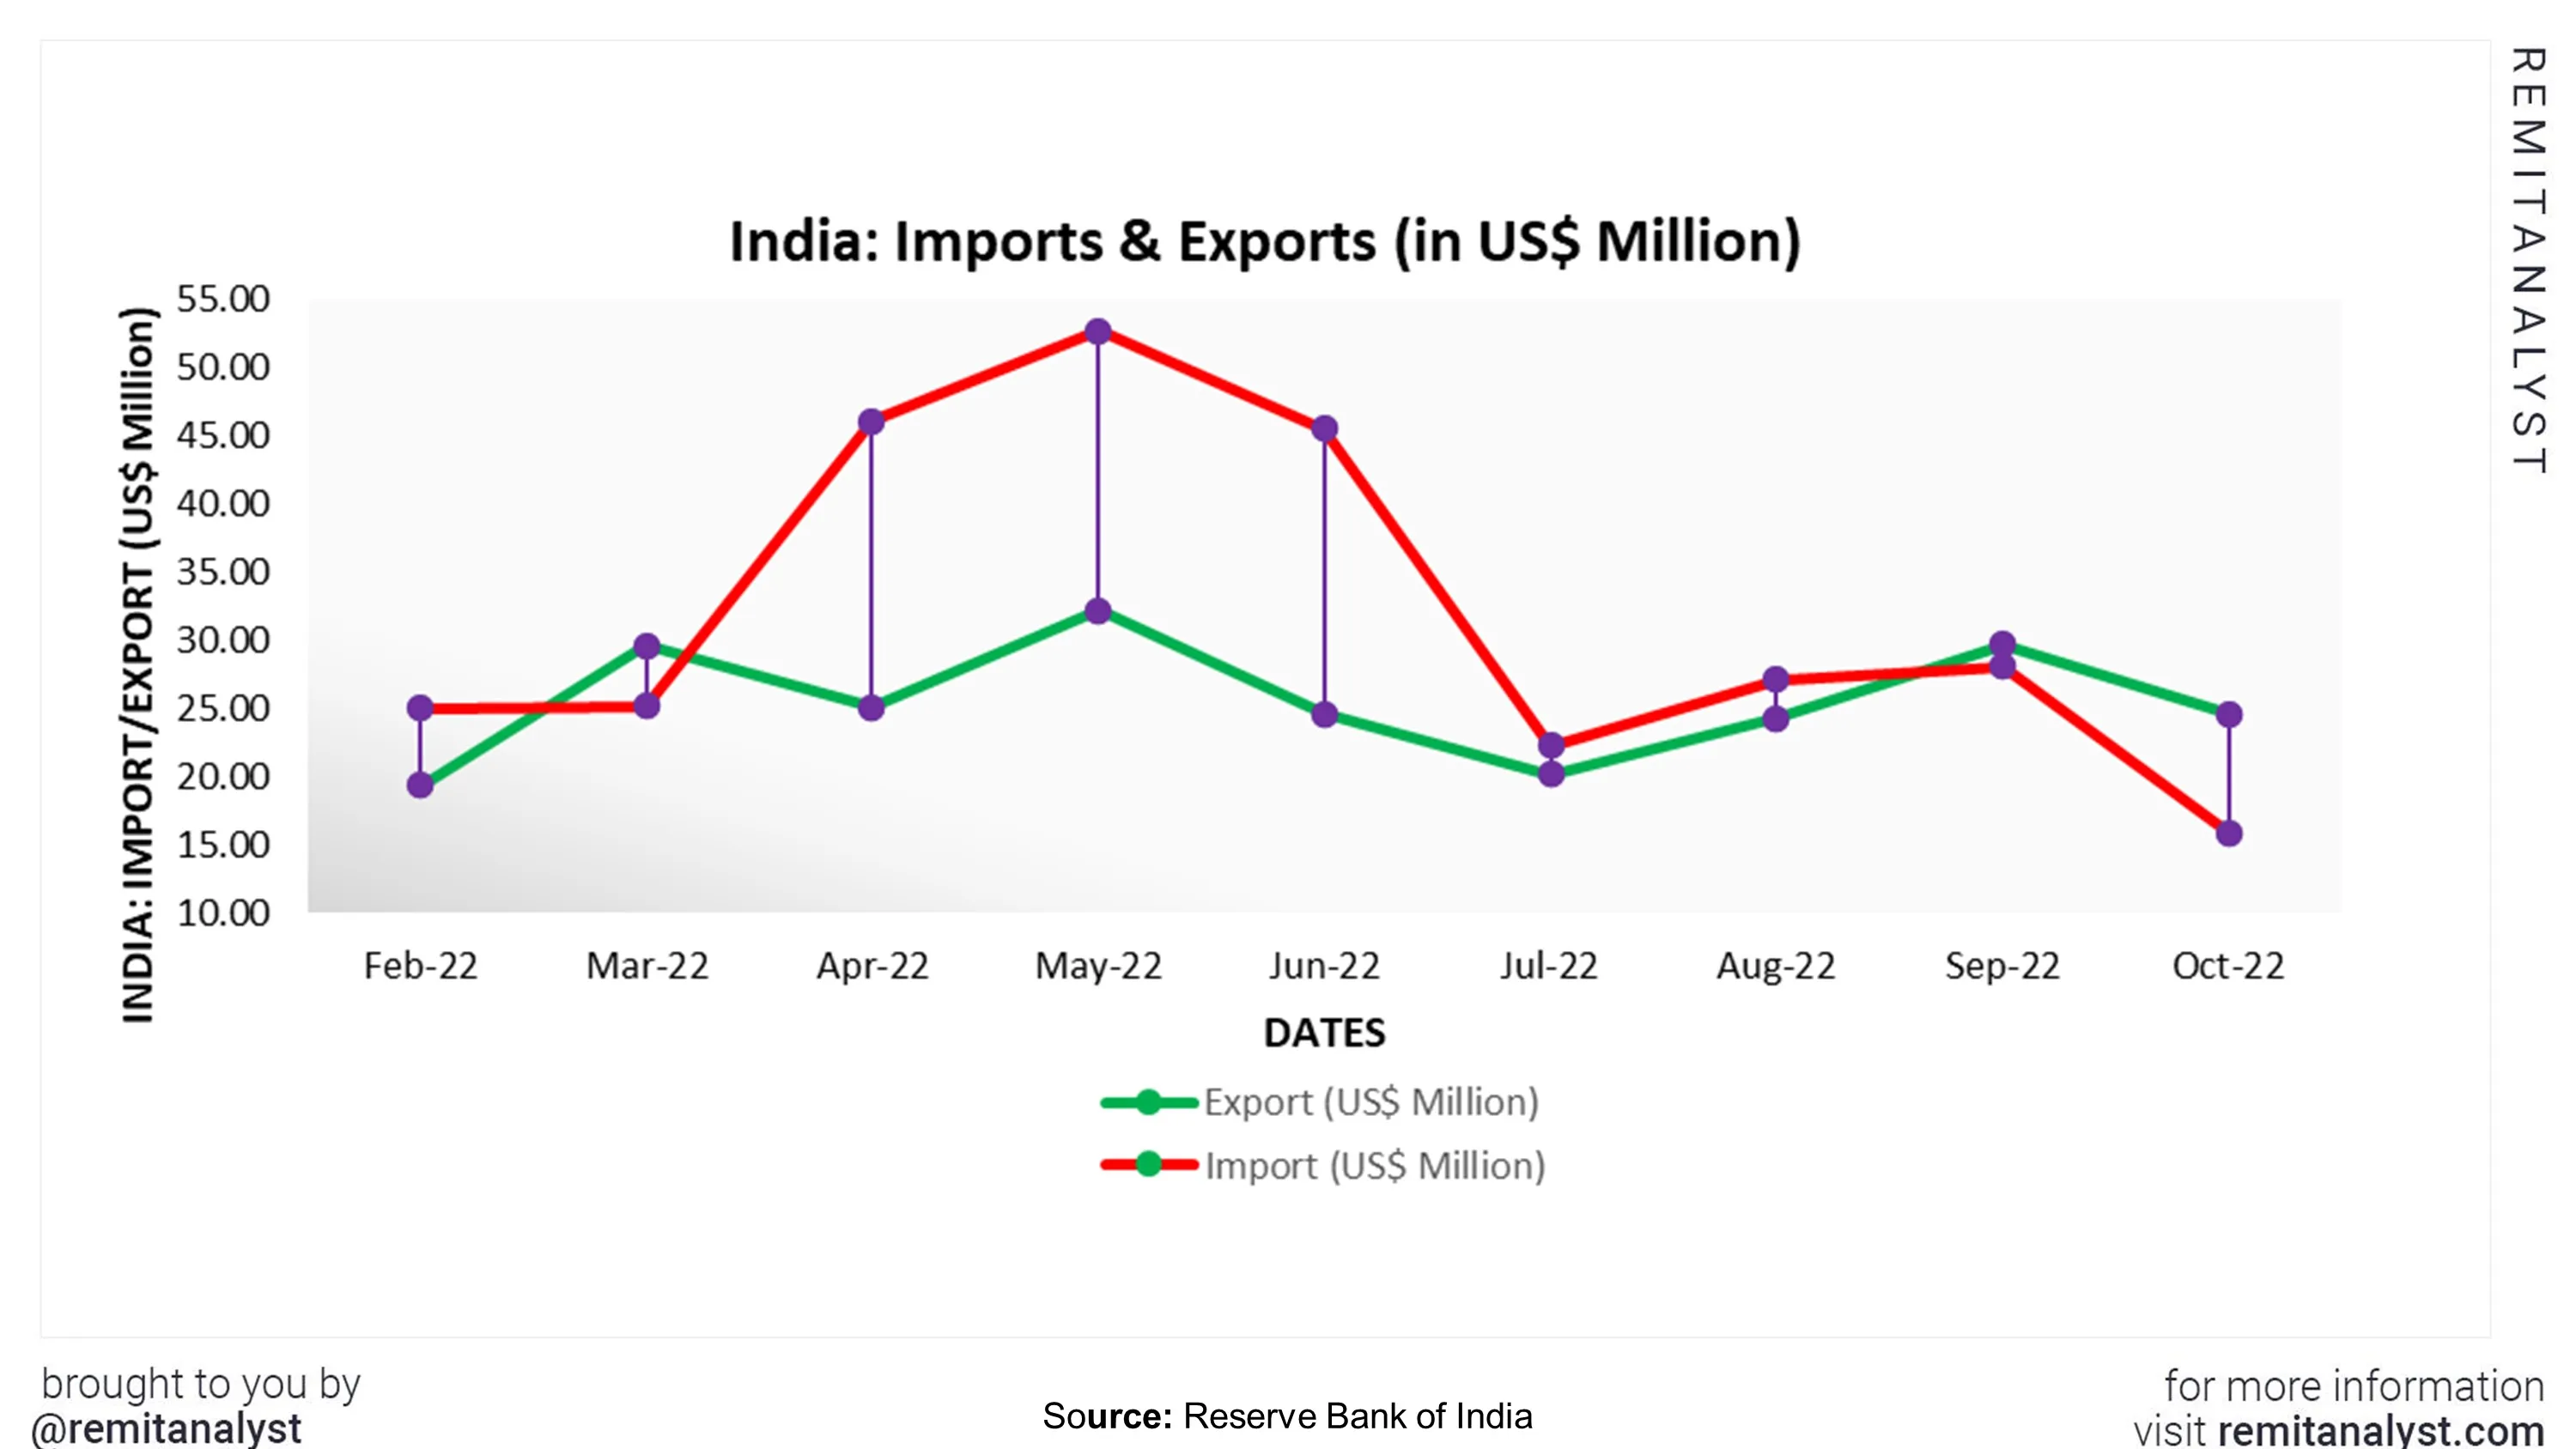 india-import-export-from-fab-2022-to-oct-2022